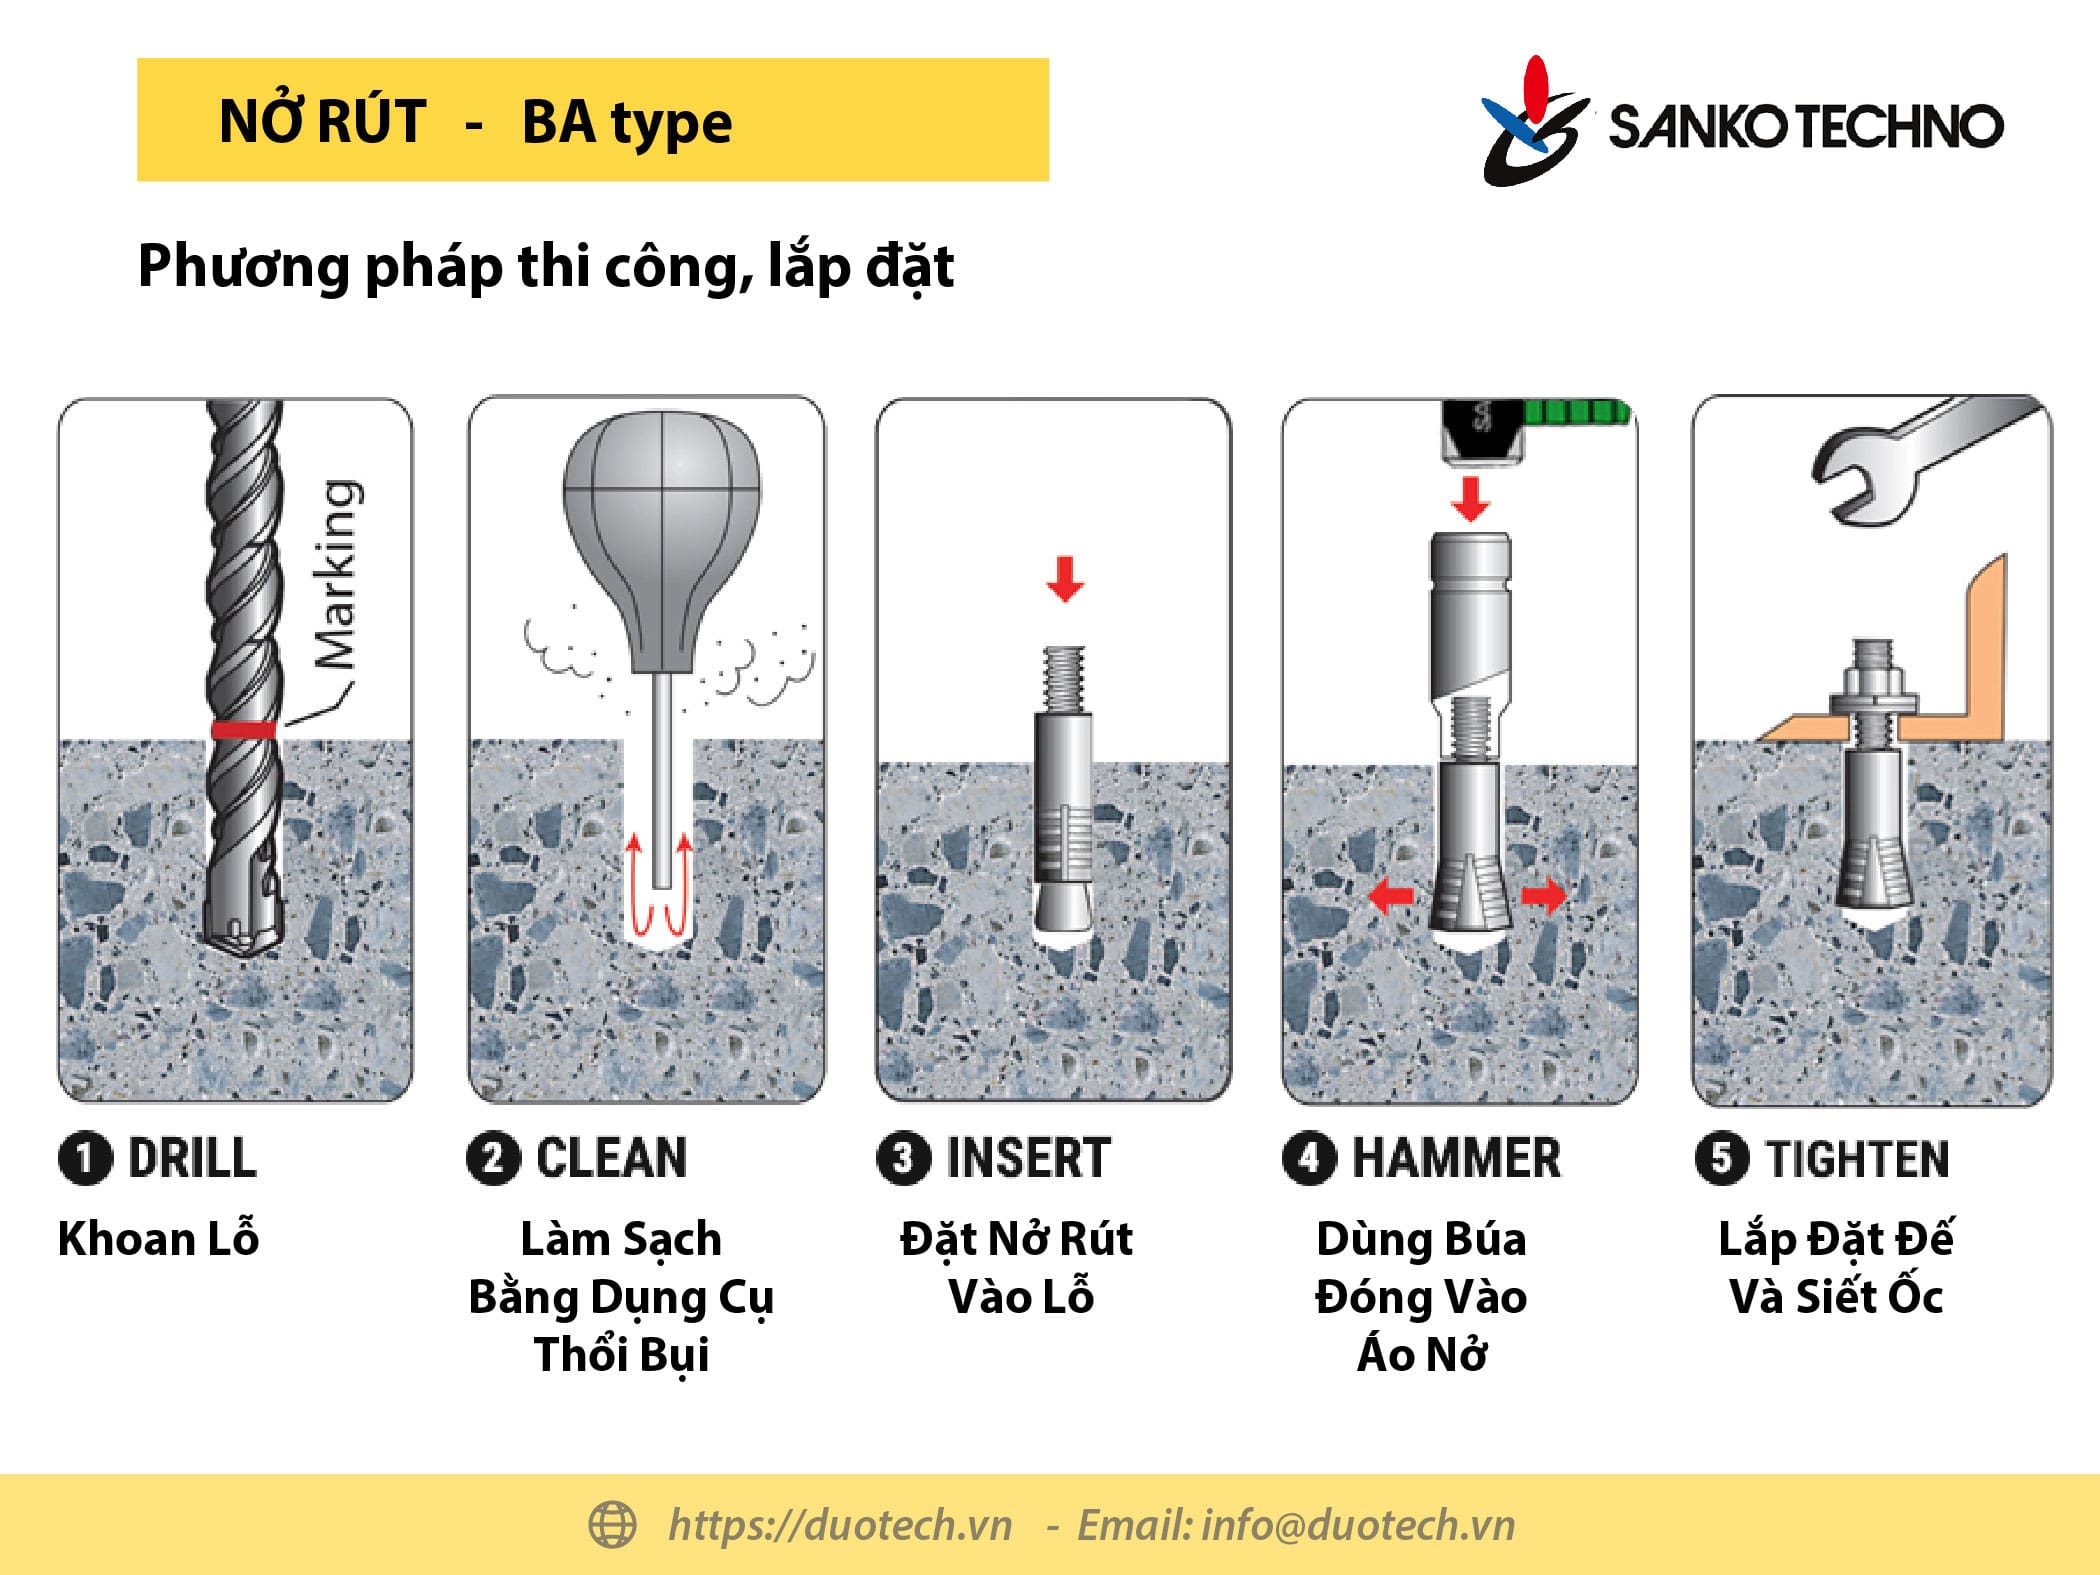 sanko bolt anchor (ba-type); BA タイプ サンコ ボルトアンカー; duotech; duogroup; duo tech; duo group; công ty tnhh kỹ thuật duo; công ty duo; cong ty duo; cong ty tnhh ky thuat duo; duo technology company limited; duotech vietnam; duotech.vn; duogroup.vn; duo channel; duo new; v-terminal; v-terminals; v terminals viet nam việt nam vietnam